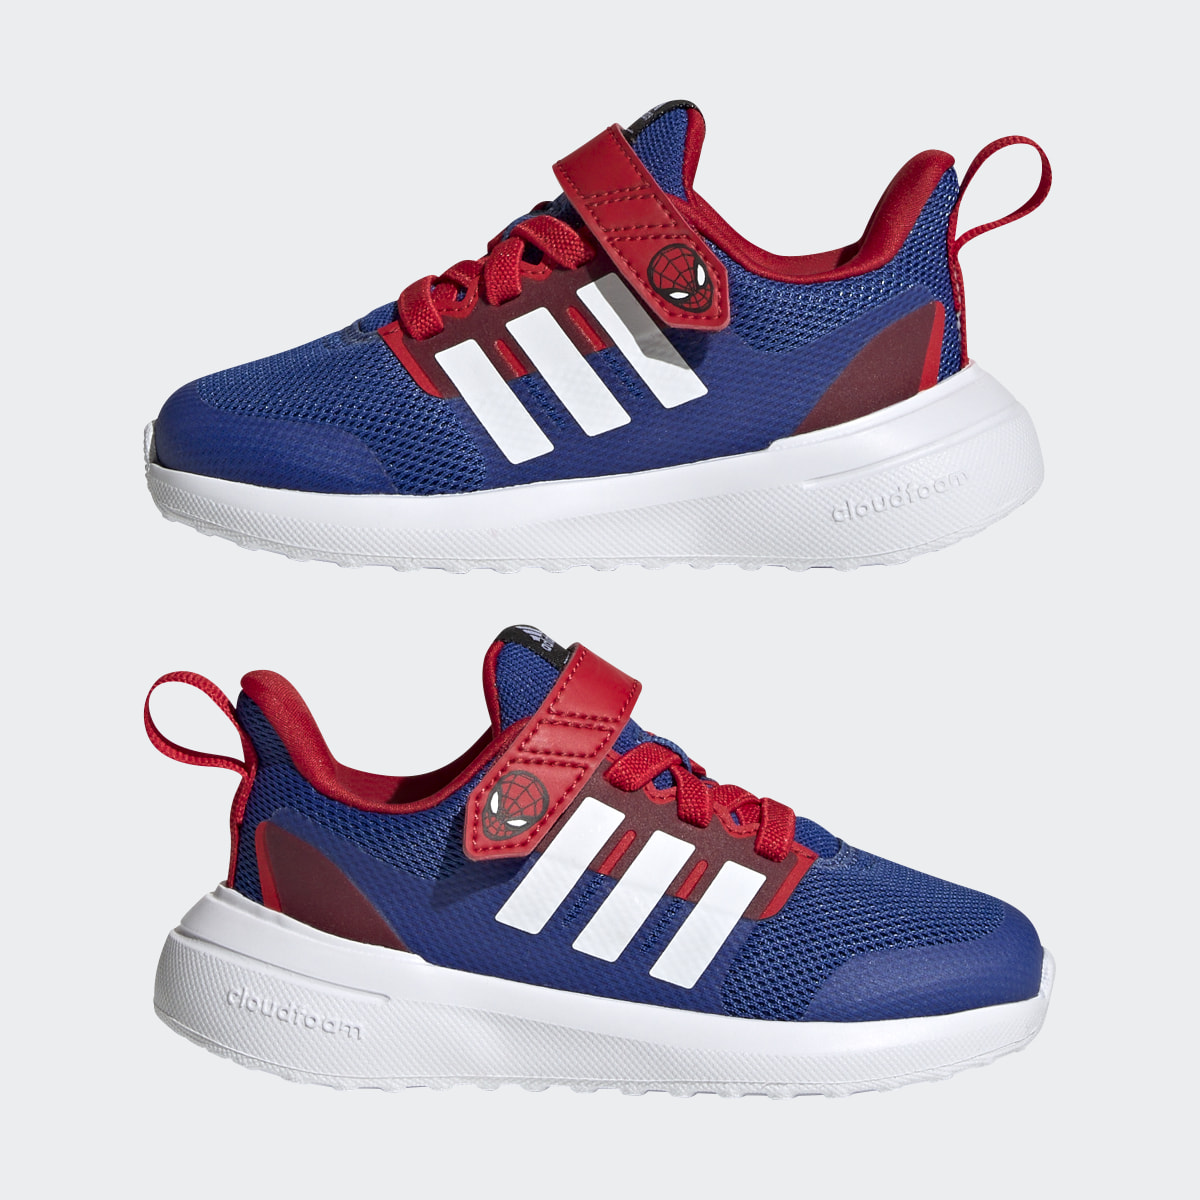 Adidas x Marvel FortaRun 2.0 Spider-Man Cloudfoam Elastic Lace Top Strap Shoes. 8